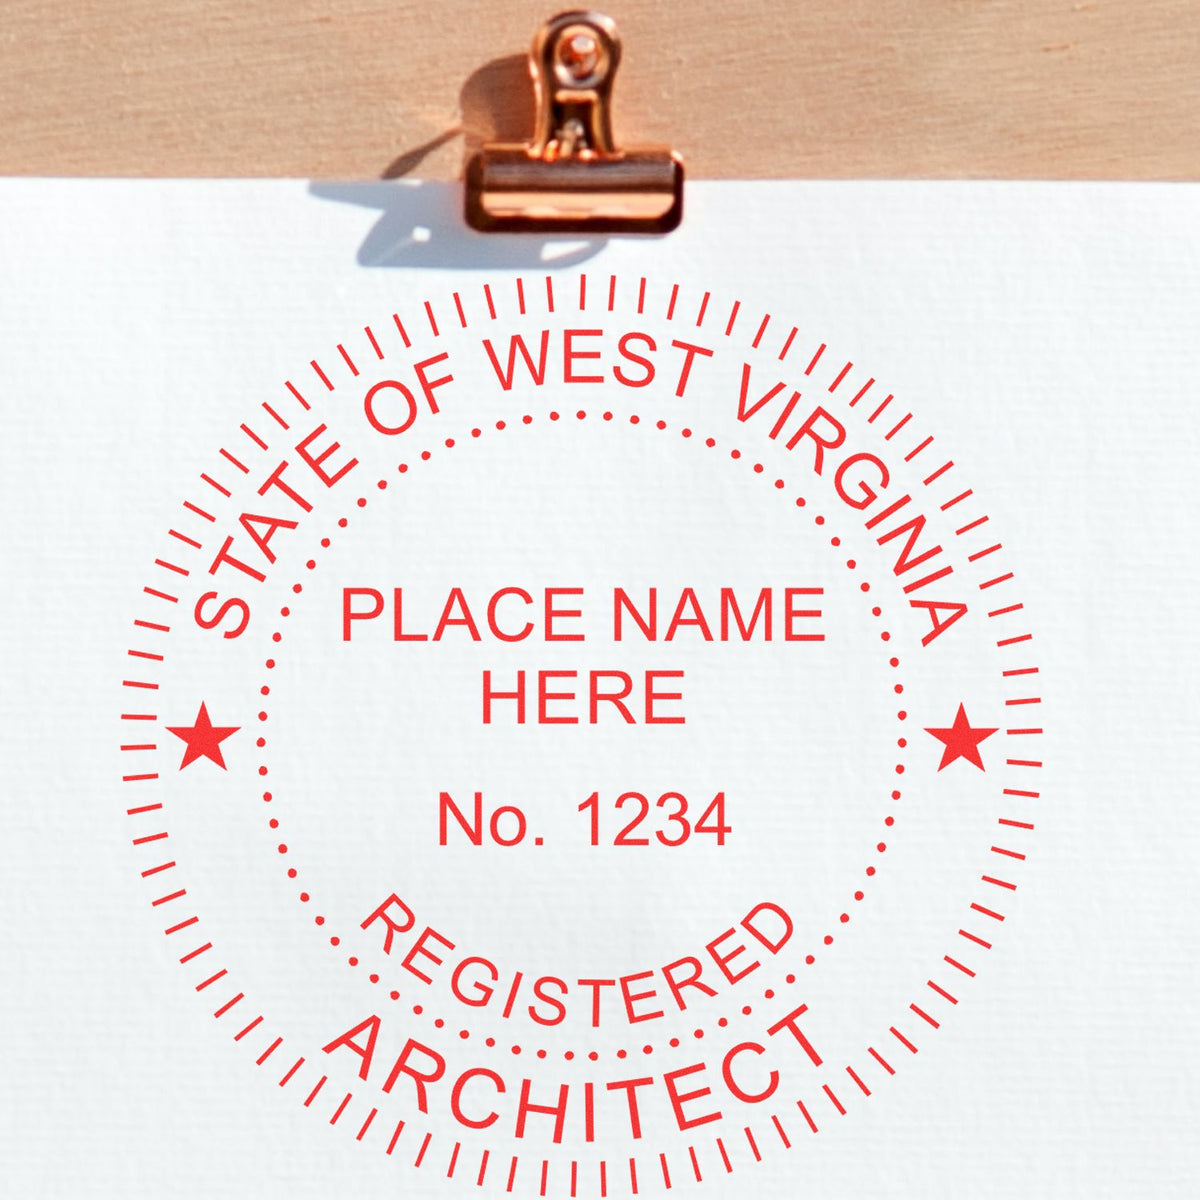 Slim Pre-Inked West Virginia Architect Seal Stamp in use photo showing a stamped imprint of the Slim Pre-Inked West Virginia Architect Seal Stamp